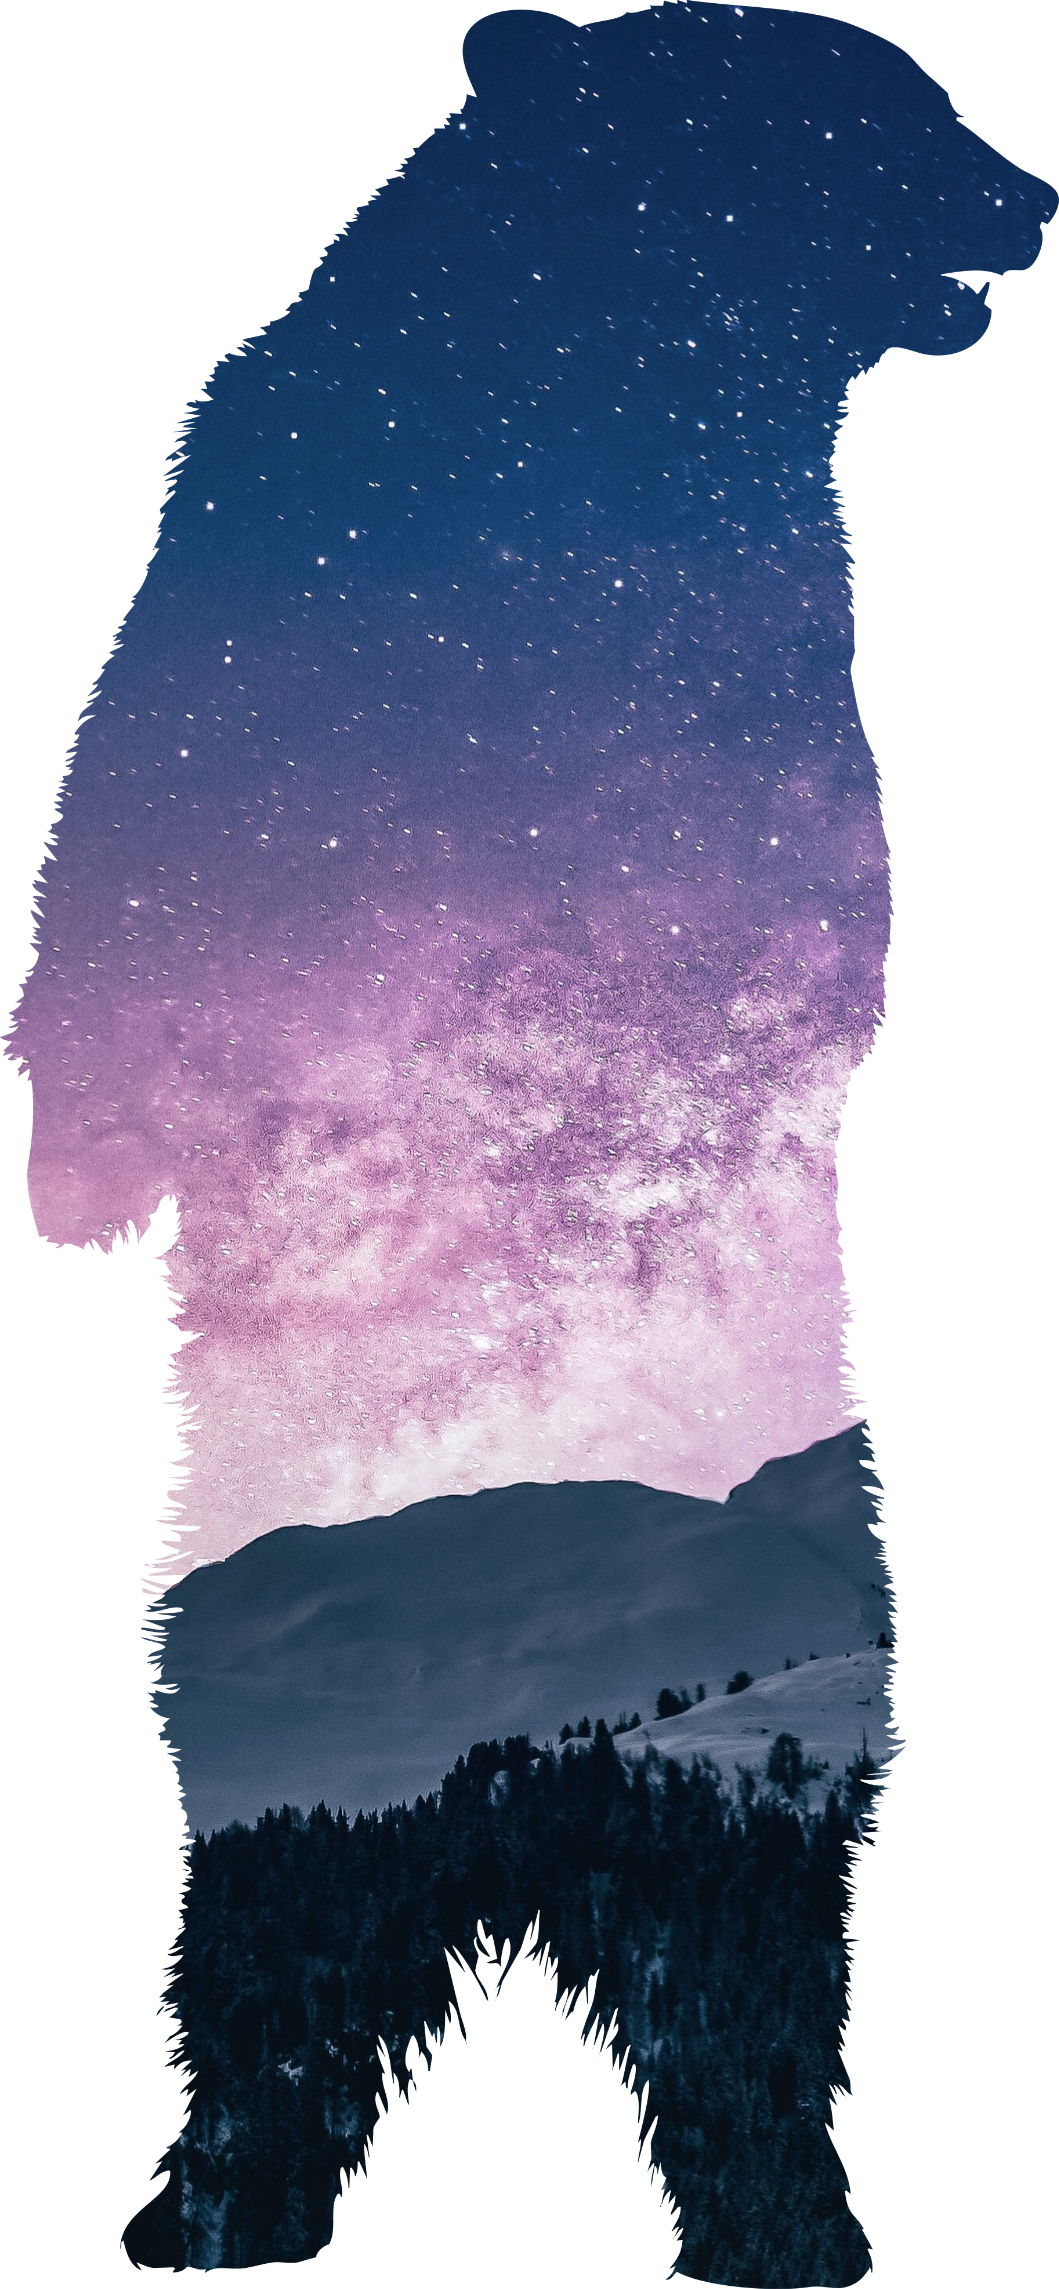 Silhouette of a standing bear with a starry mountain vista behind